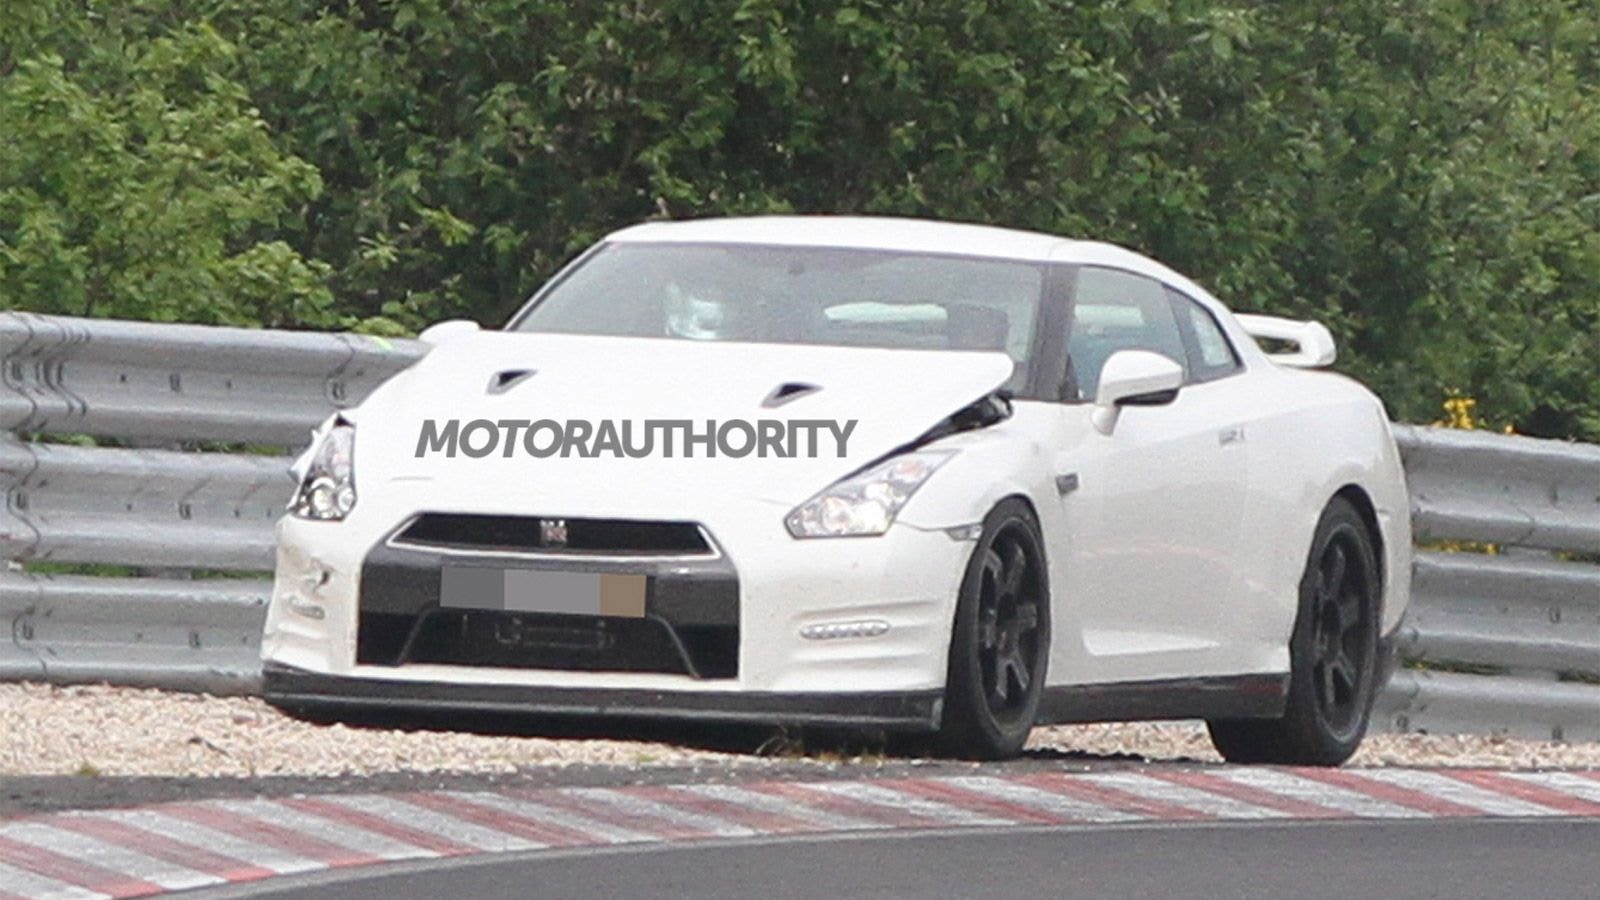 2013 Nissan GT-R that crashed on the Nürburgring-Nordschleife in May, 2012